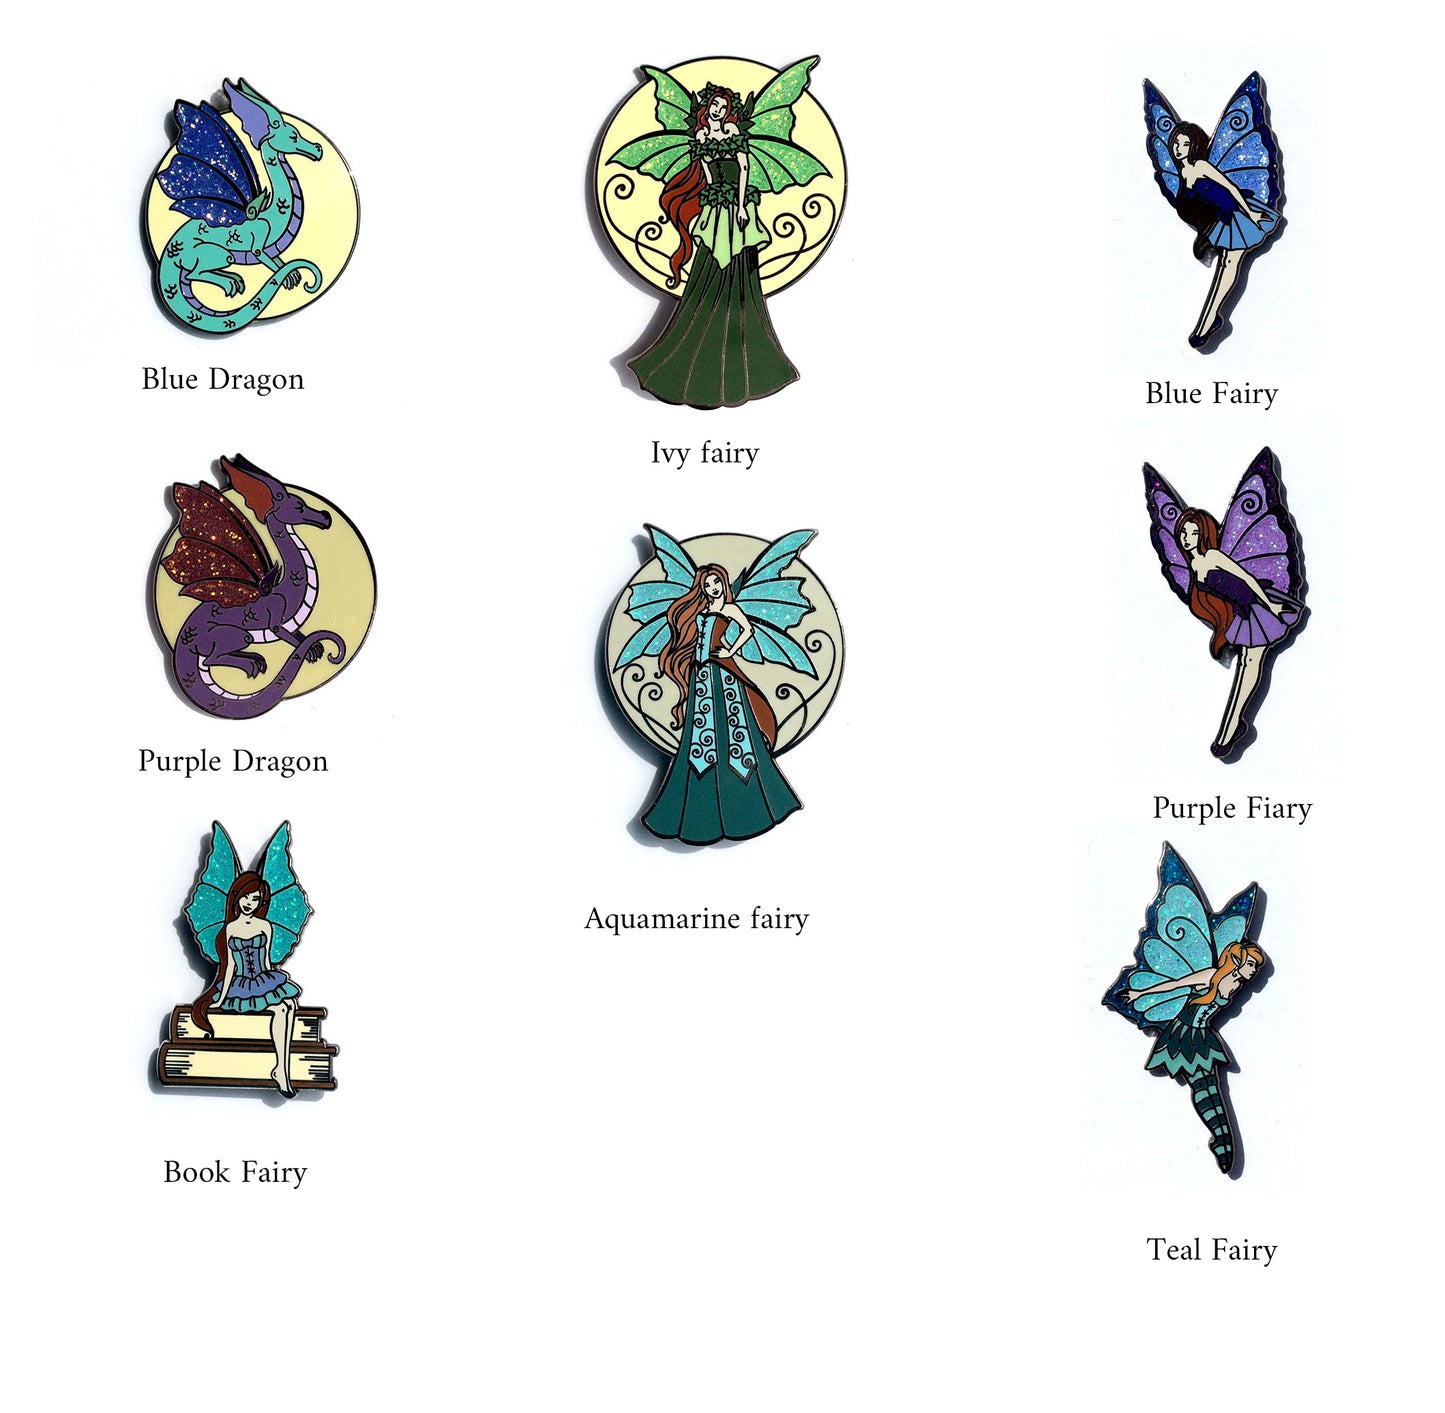 Blue Fairy by Amy Brown, Pin